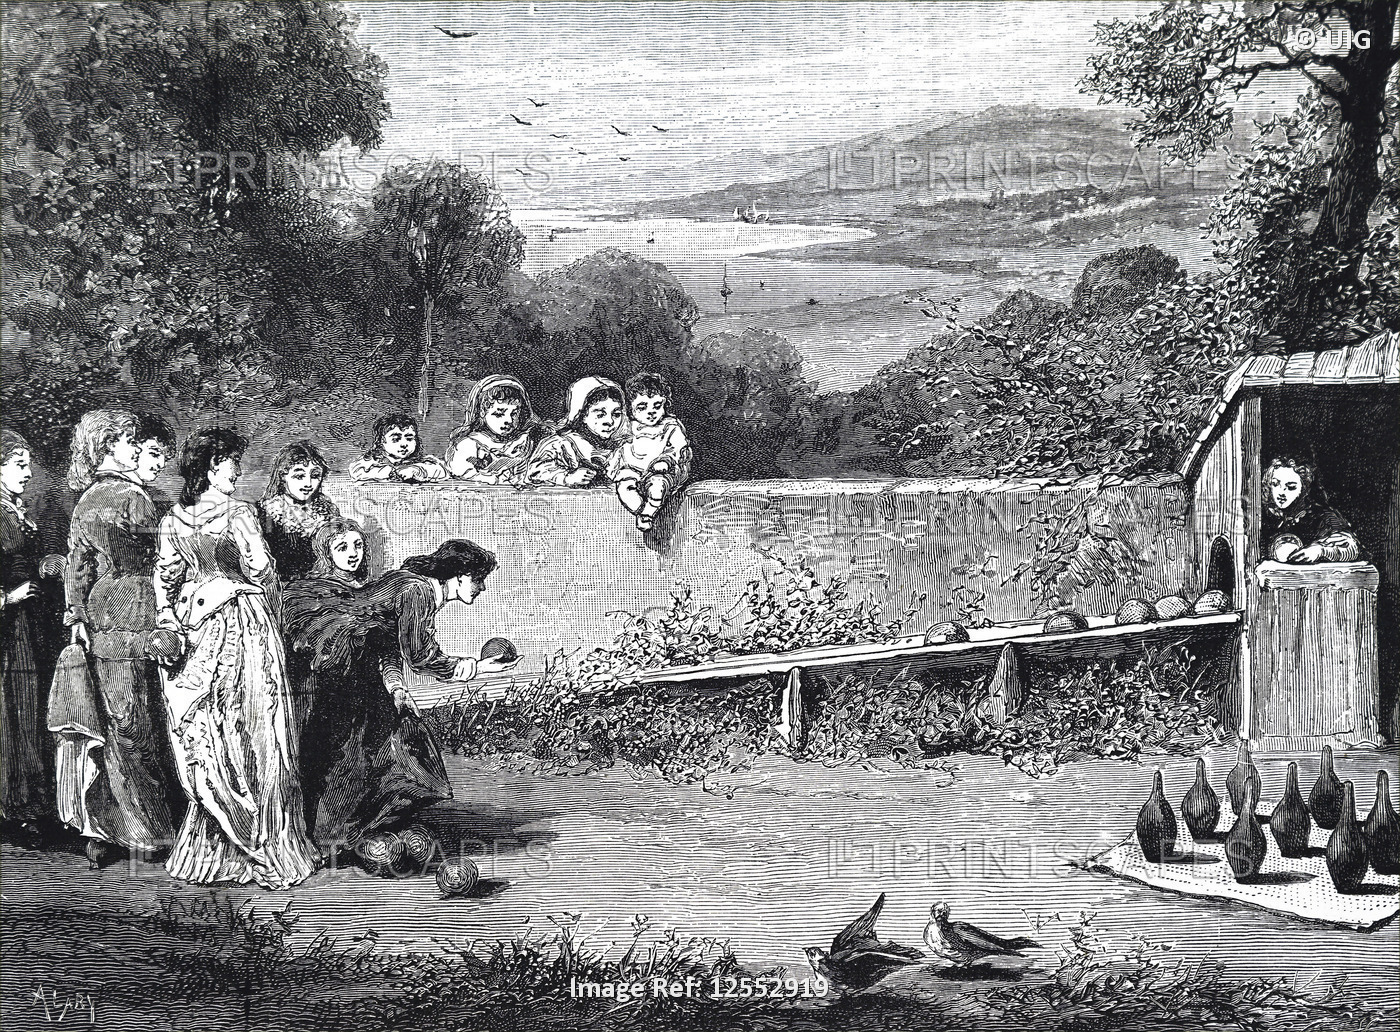 Illustration depicting a game of early bowling being played outside, 19th century